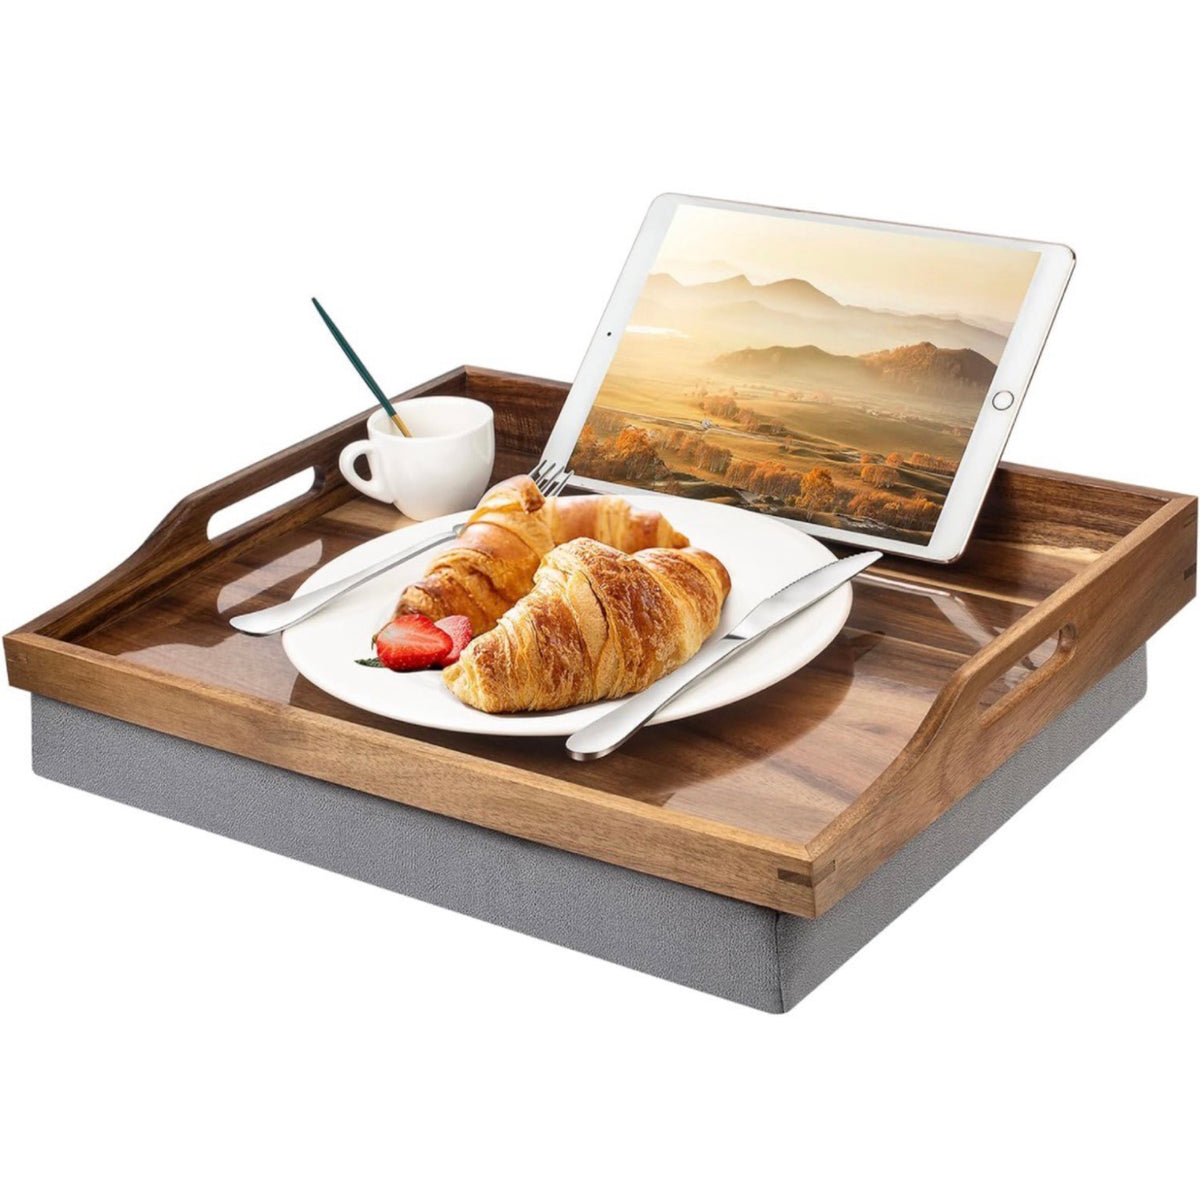 17" Acacia Wood Lap Desk with Detachable Cushion & Phone Holder - Breakfast in Bed